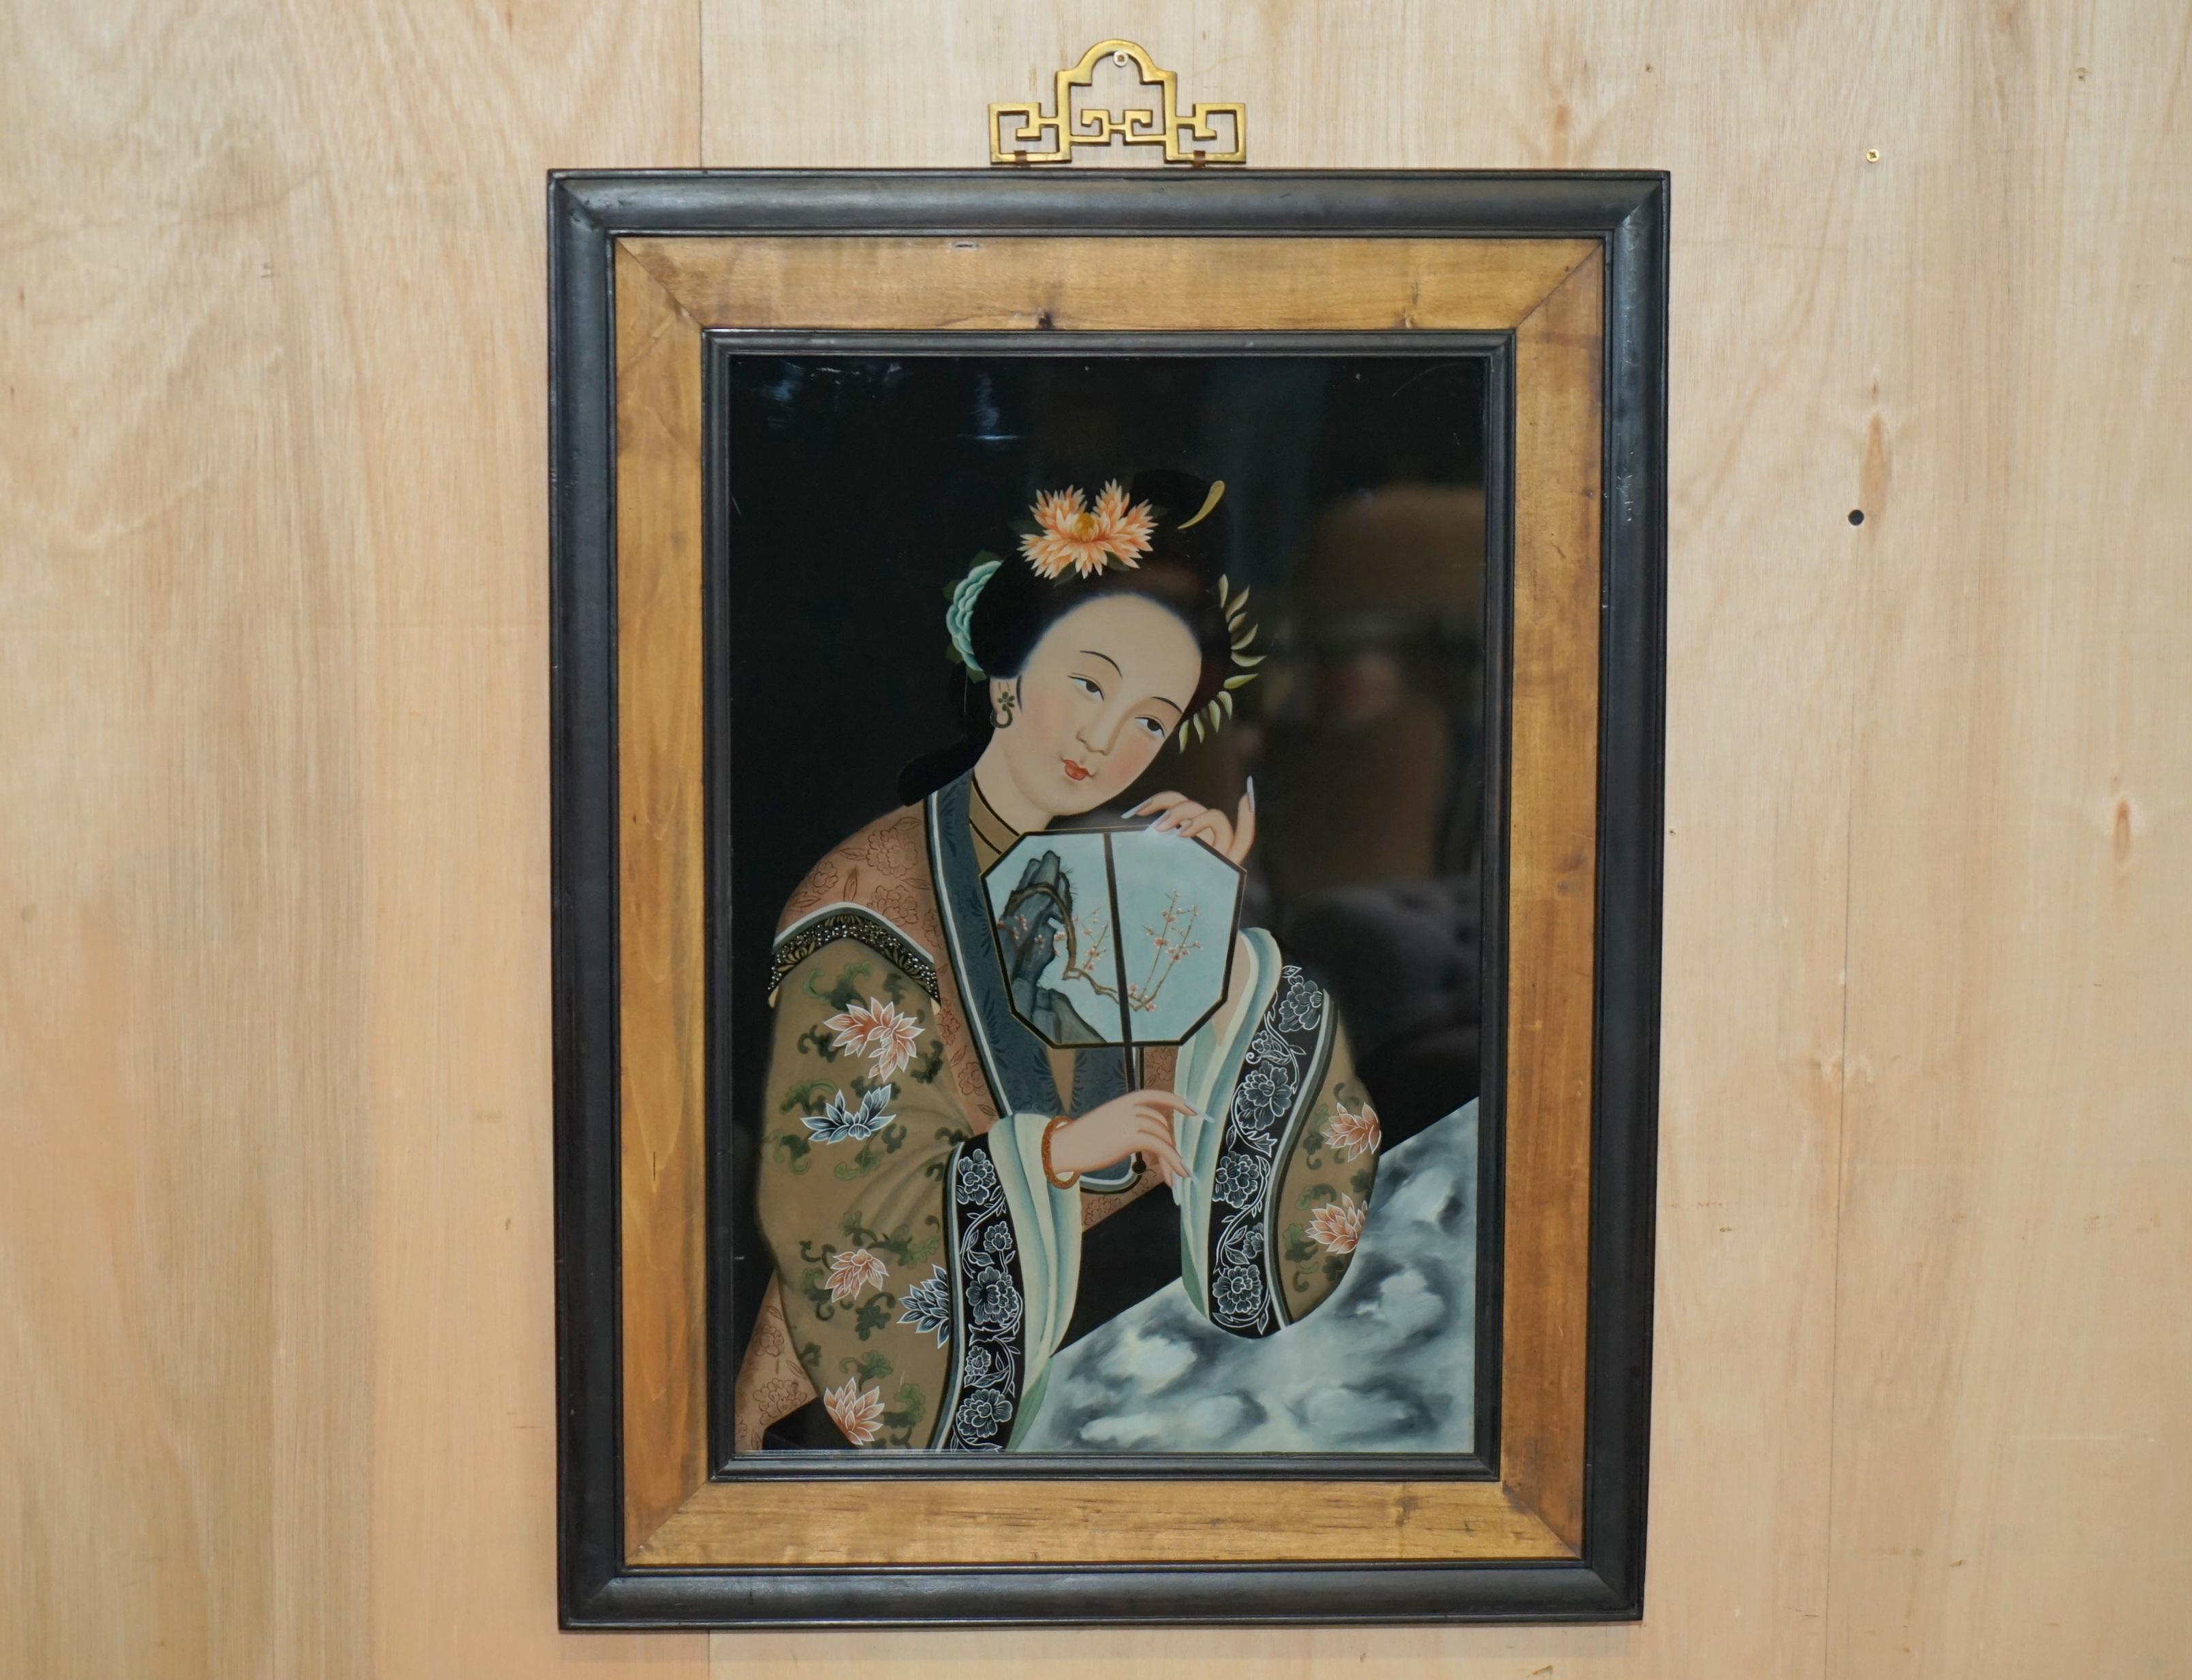 Royal House Antiques

Royal House Antiques is delighted to offer for sale this lovely pair of Antique Chinese Ancestral Portraits which have been hand reverse painted on to the back of glass

Please note the delivery fee listed is just a guide, it